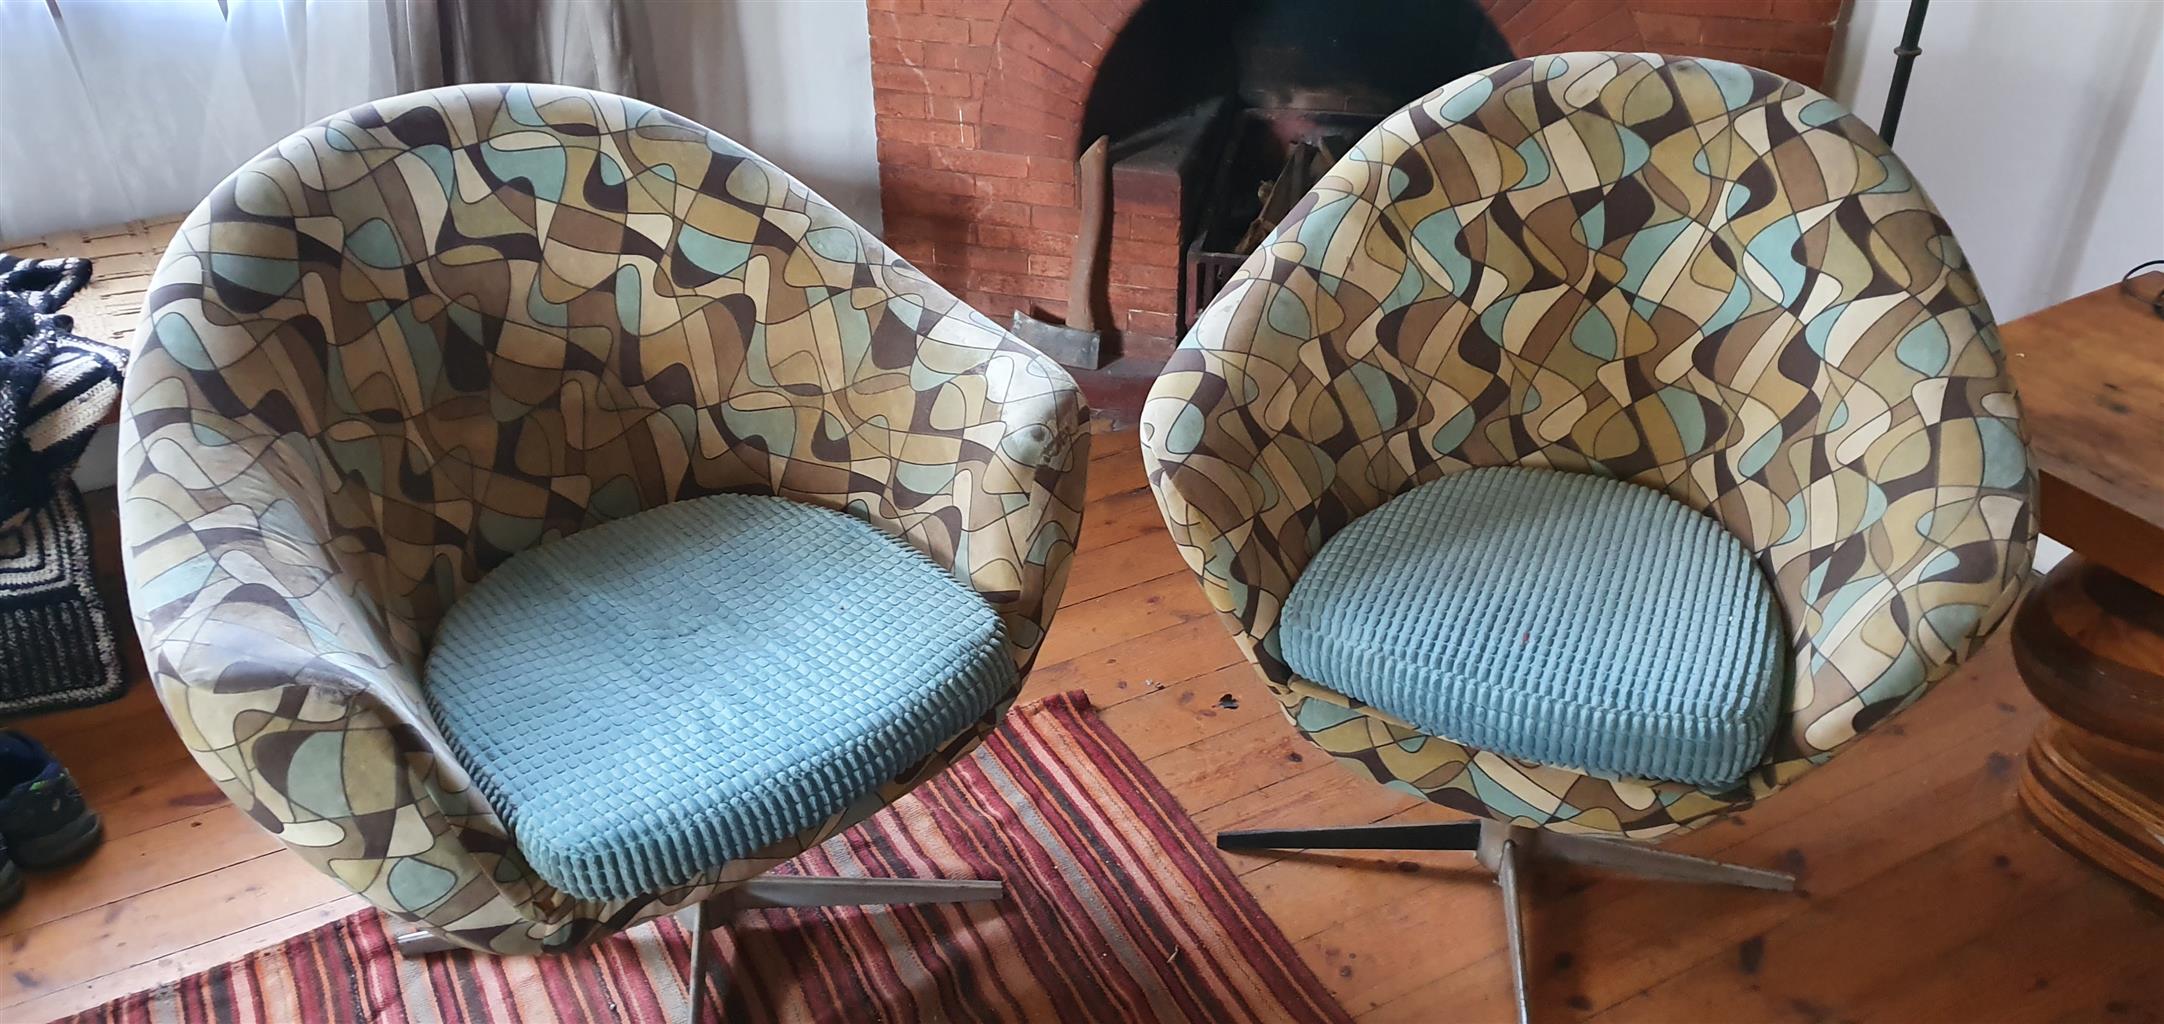 tub chairs for sale x 2